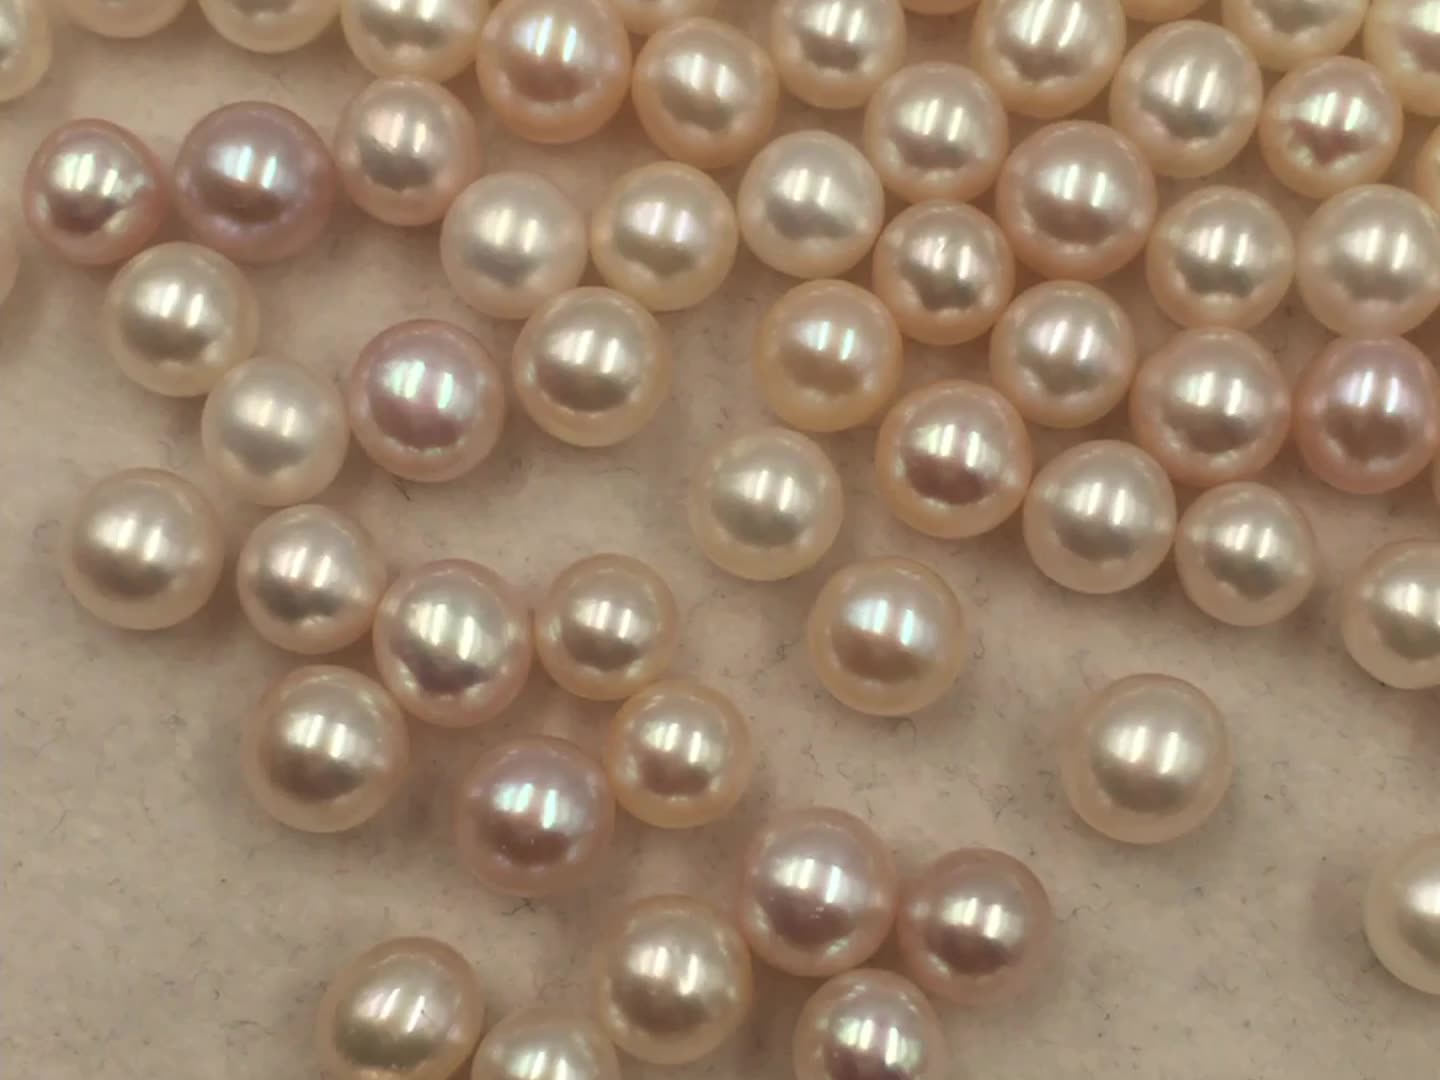 6.5-7.5 mm DIY Freshwater Pearls Wholesale, high quality AAA white round pearl nature loose freshwater pearl,half or no hole